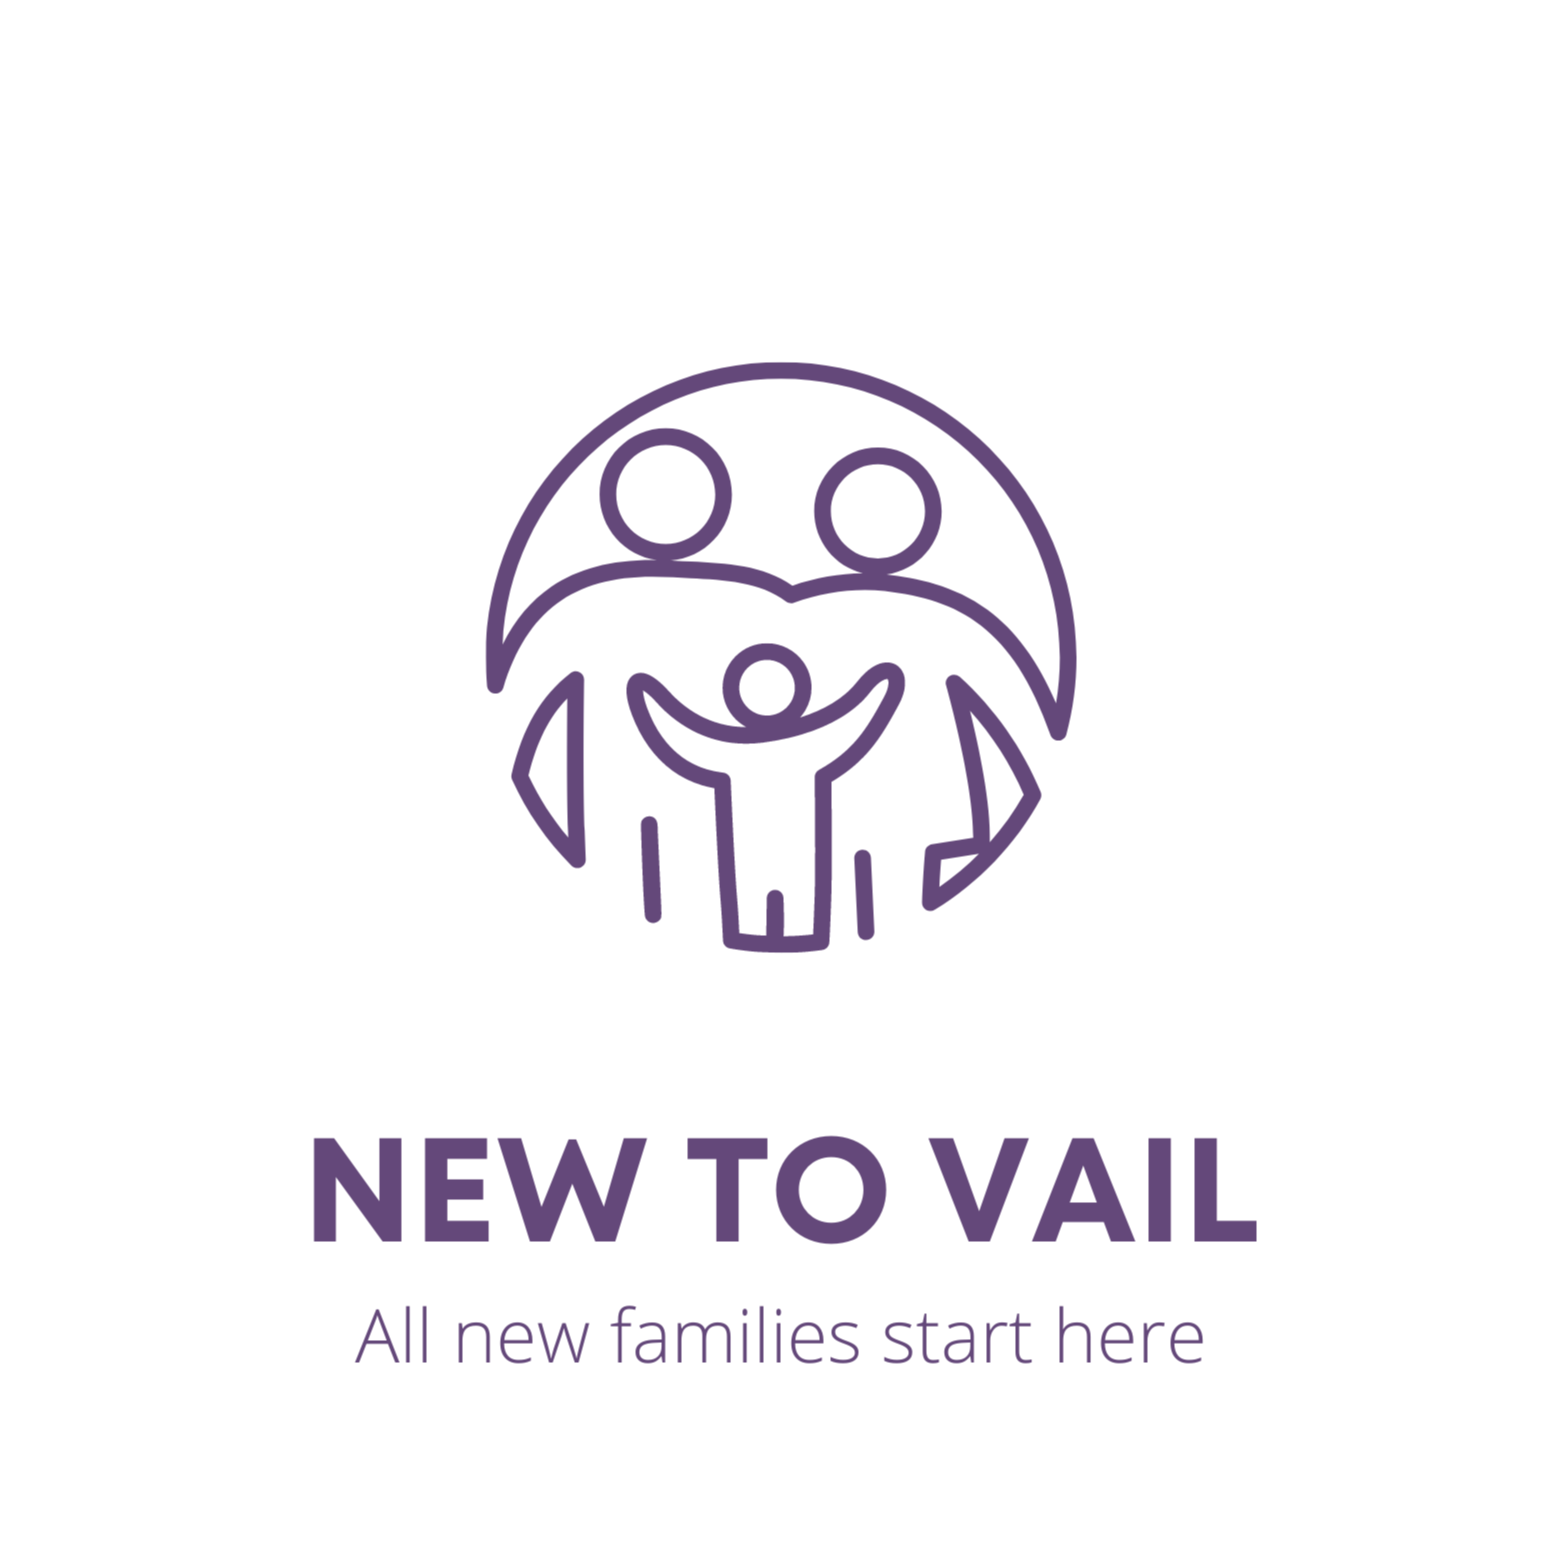 NEW TO VAIL